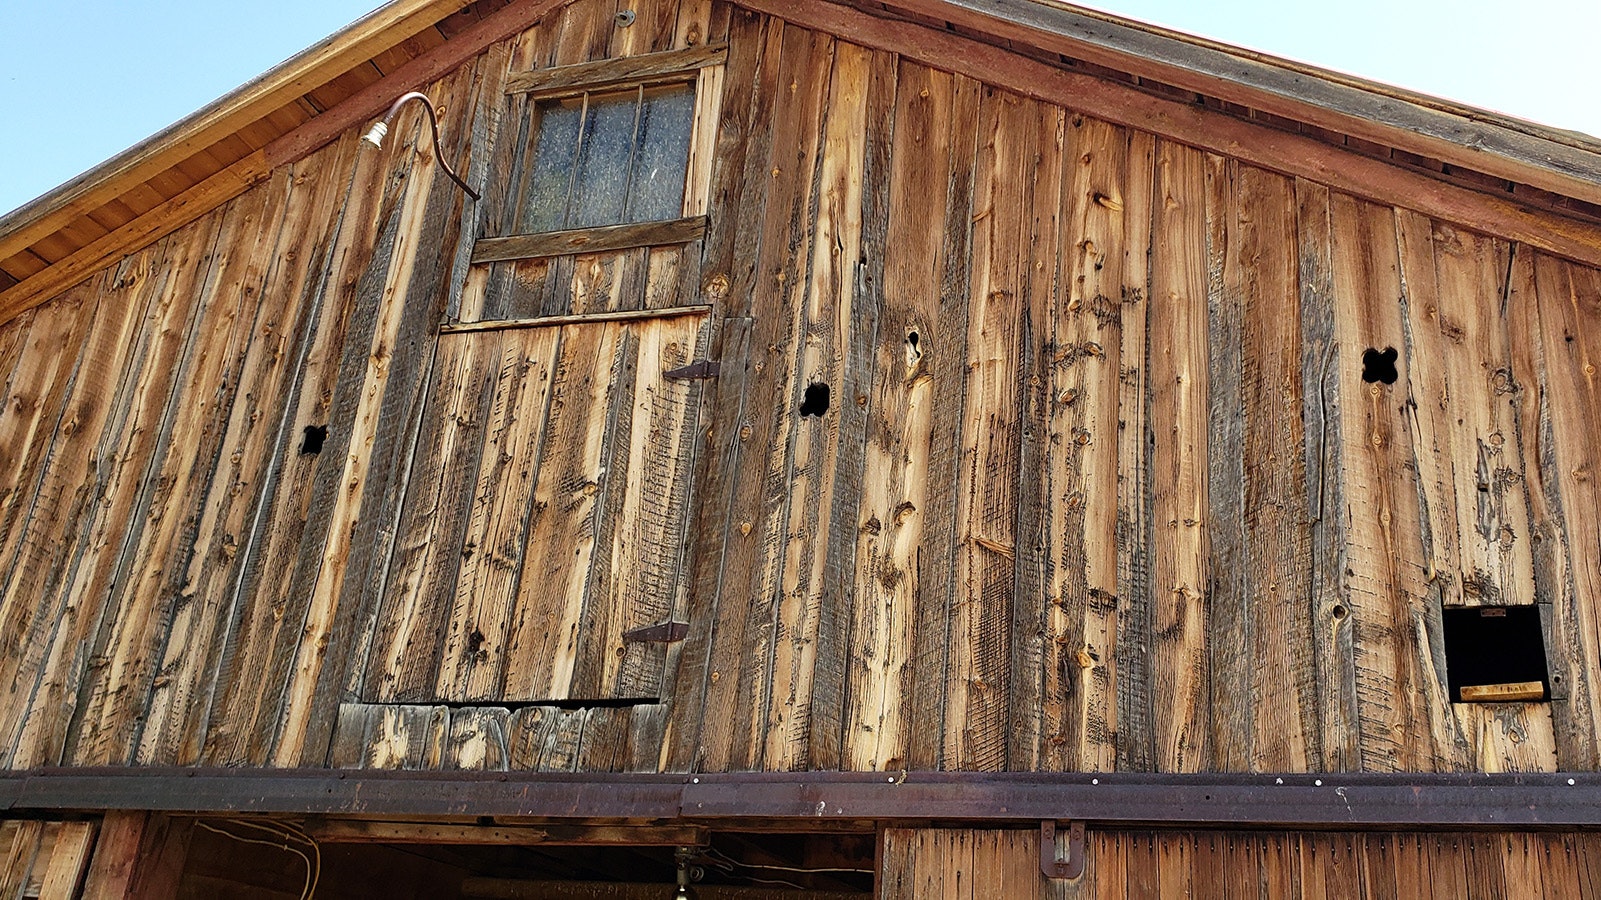 These cloverleaf holes in the TA Ranch's barn were cut to hold shotguns. Bullet holes are also still visible in the barn walls.